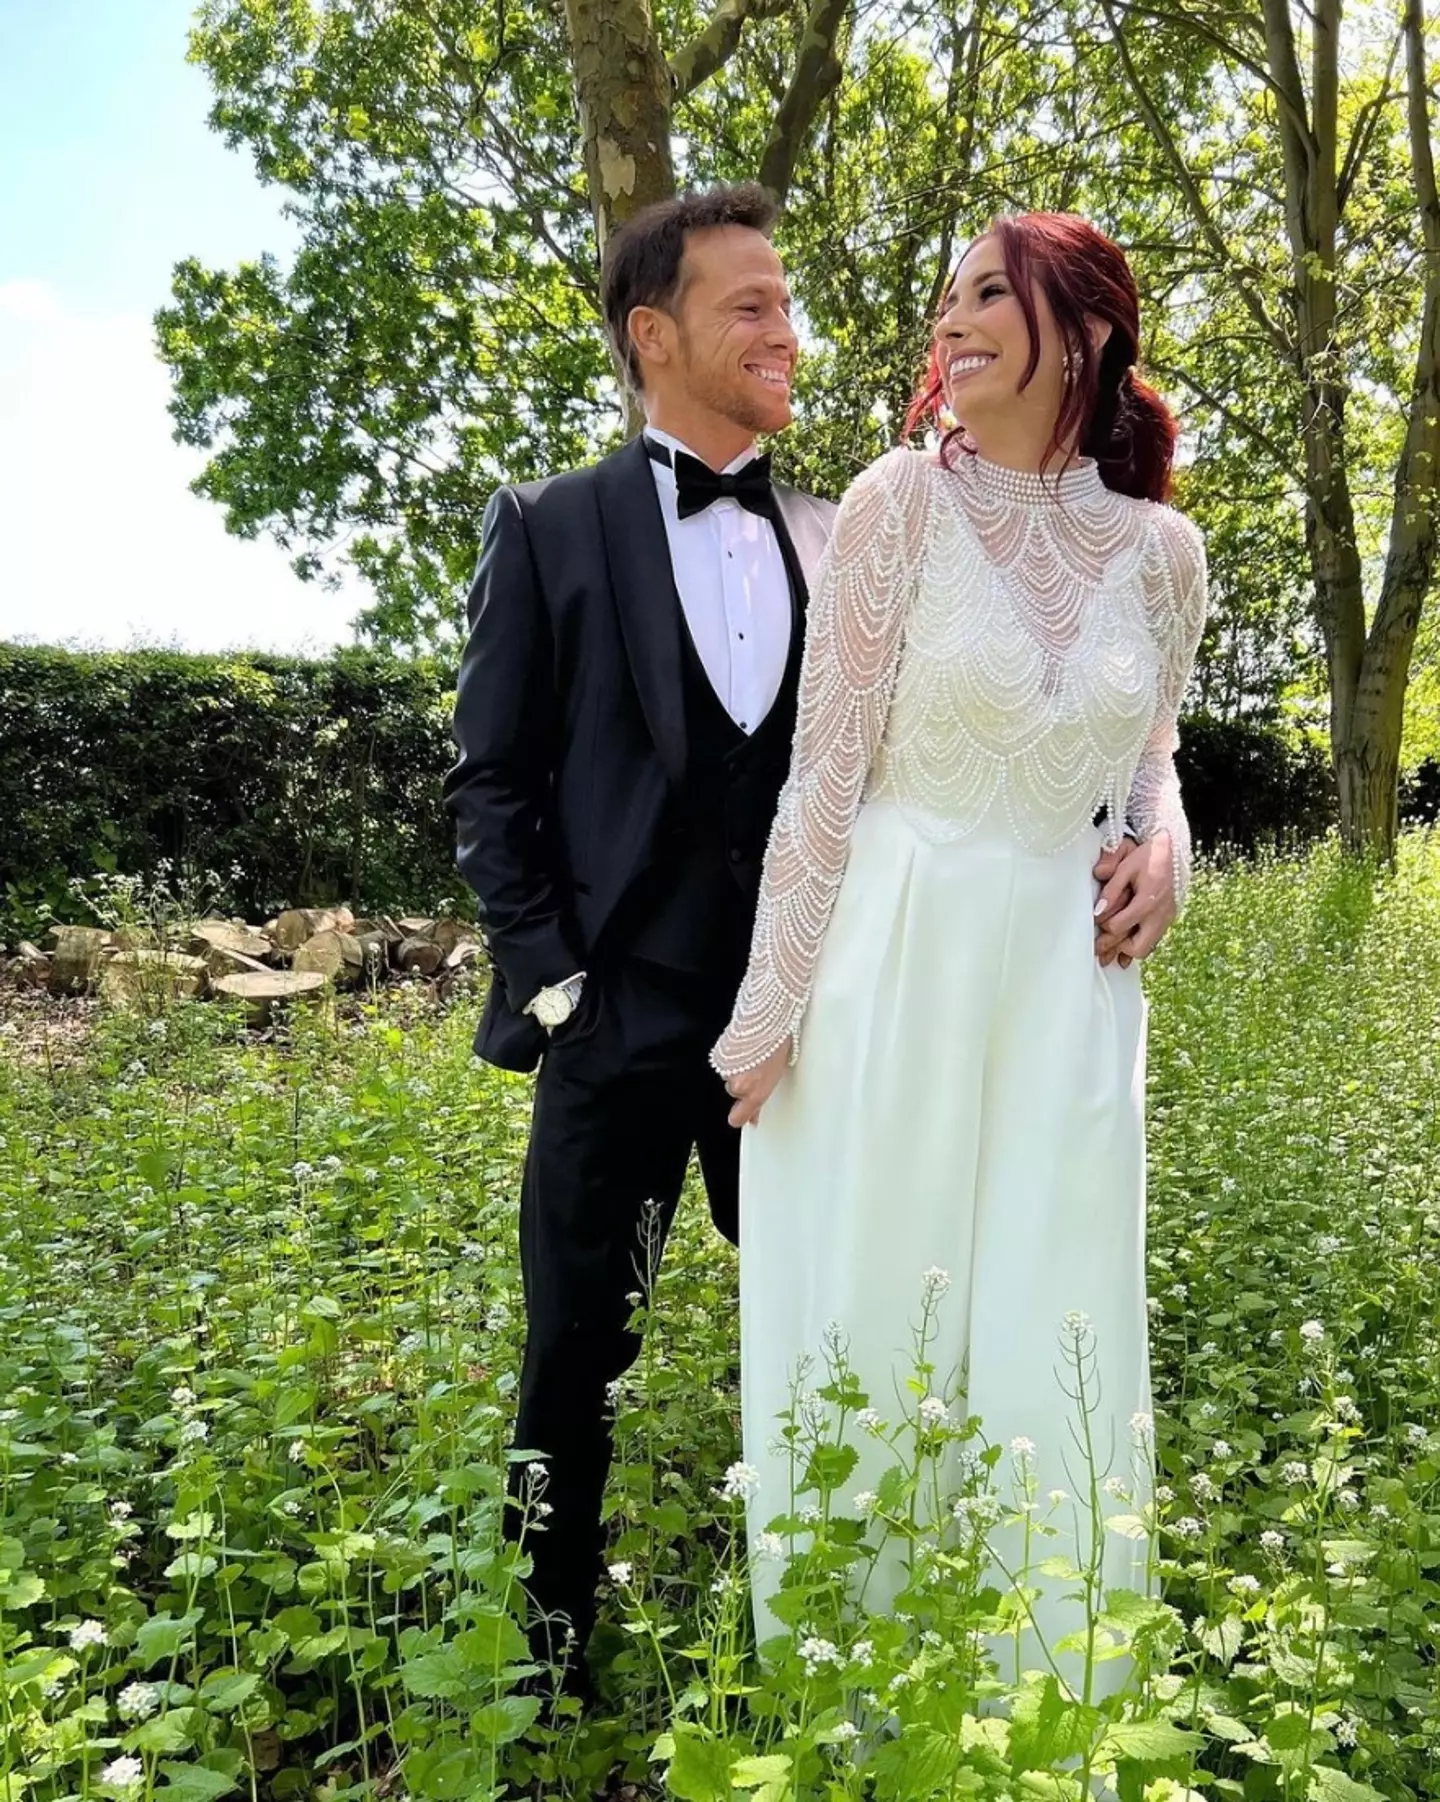 Stacey Solomon and Joe Swash tied the knot on Sunday, 24 July.